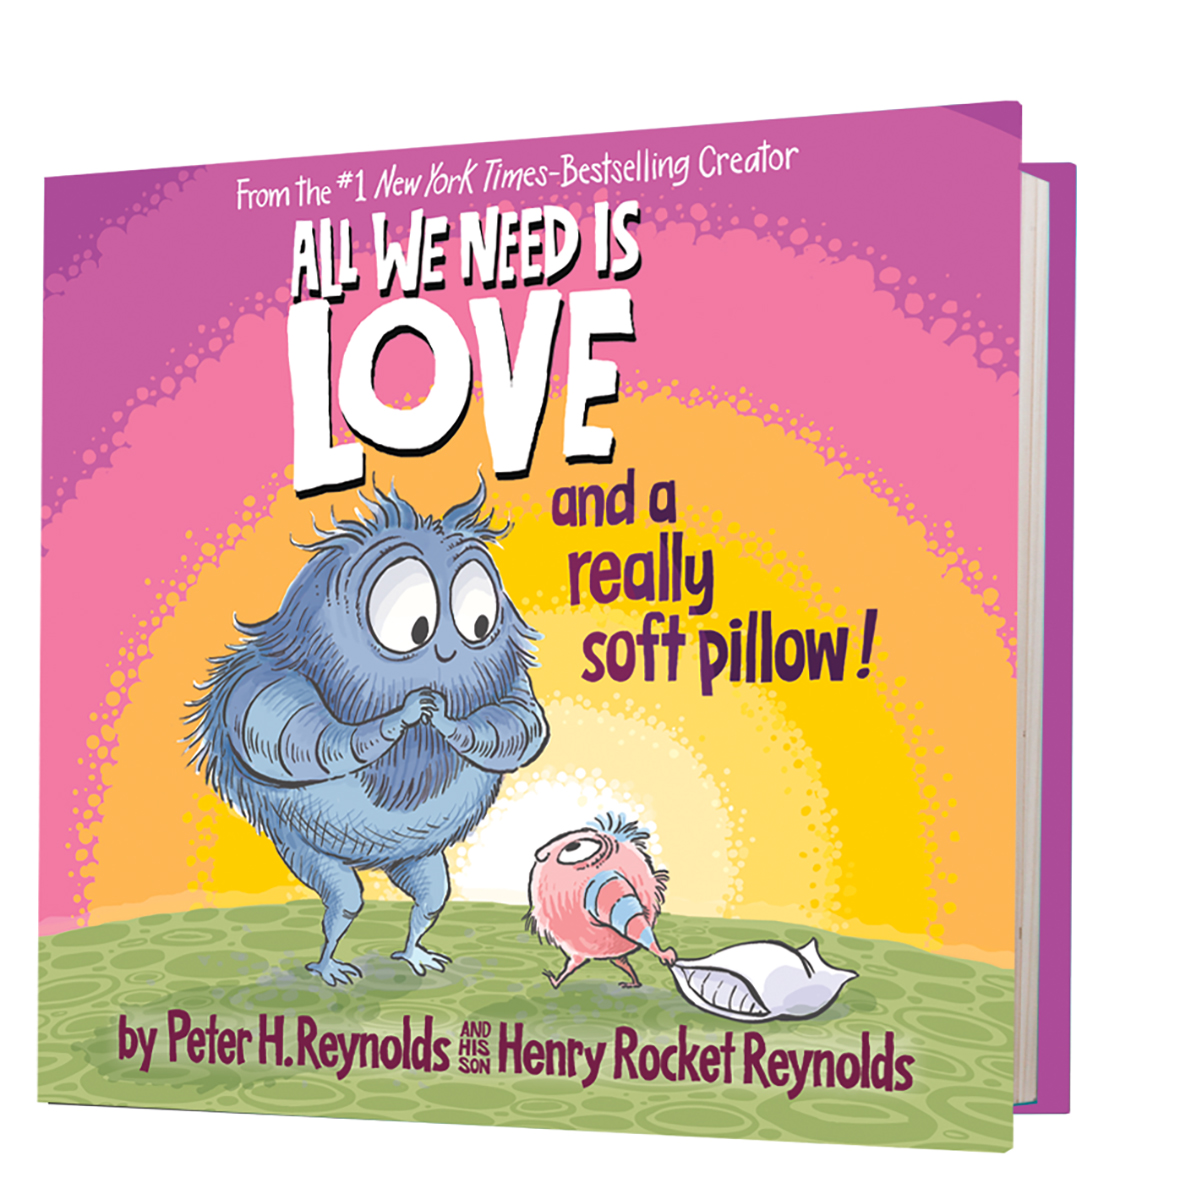  All We Need Is Love And A Really Soft Pillow! 